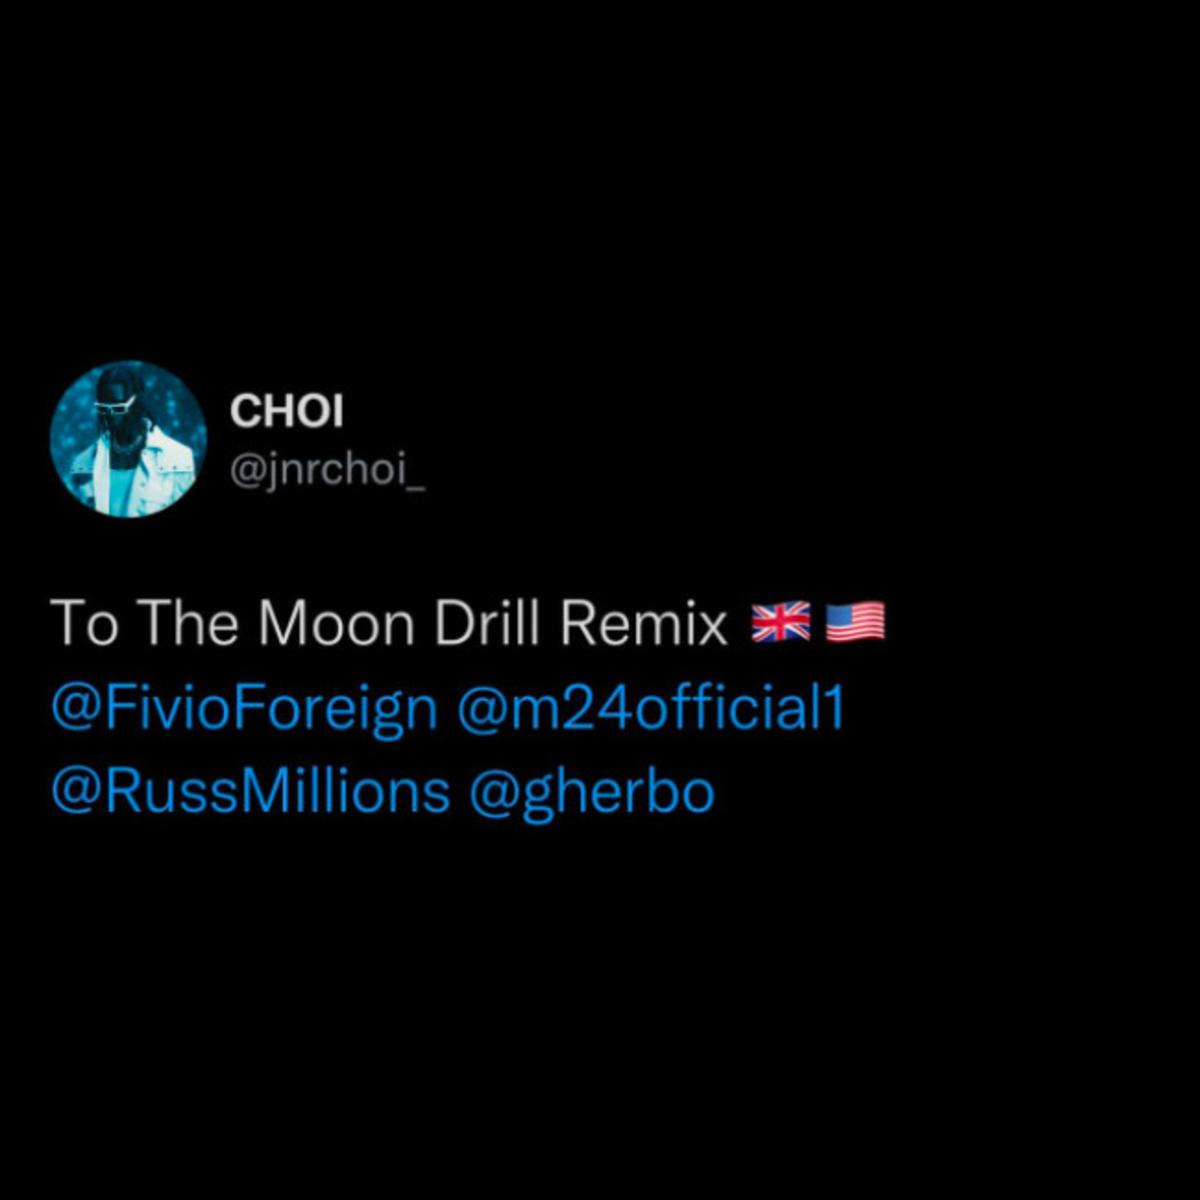 JNR Choi Grabs G Herbo, Fivio Foreign, Russ Millions & M24 For A Remix To “On The Moon”